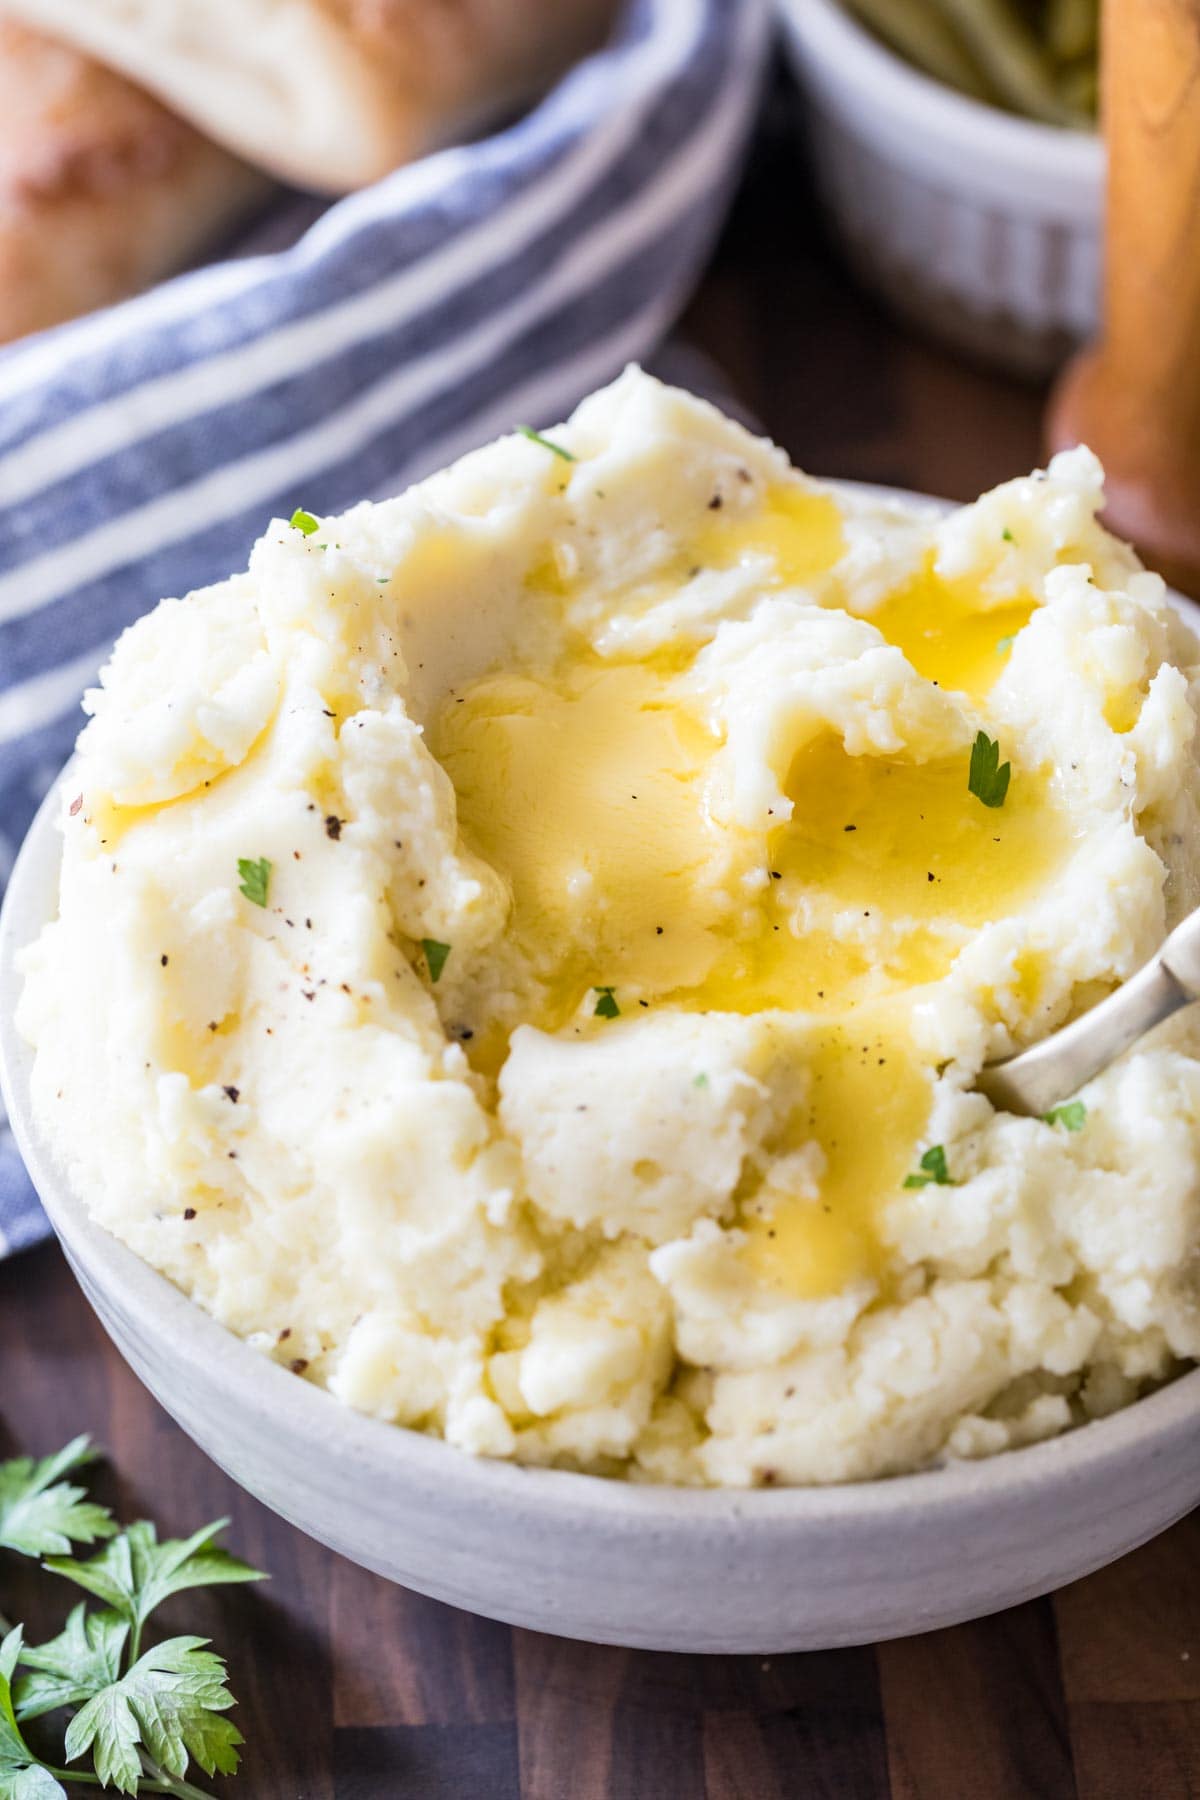 Large bowl of mashed potatoes with melted butter on top.